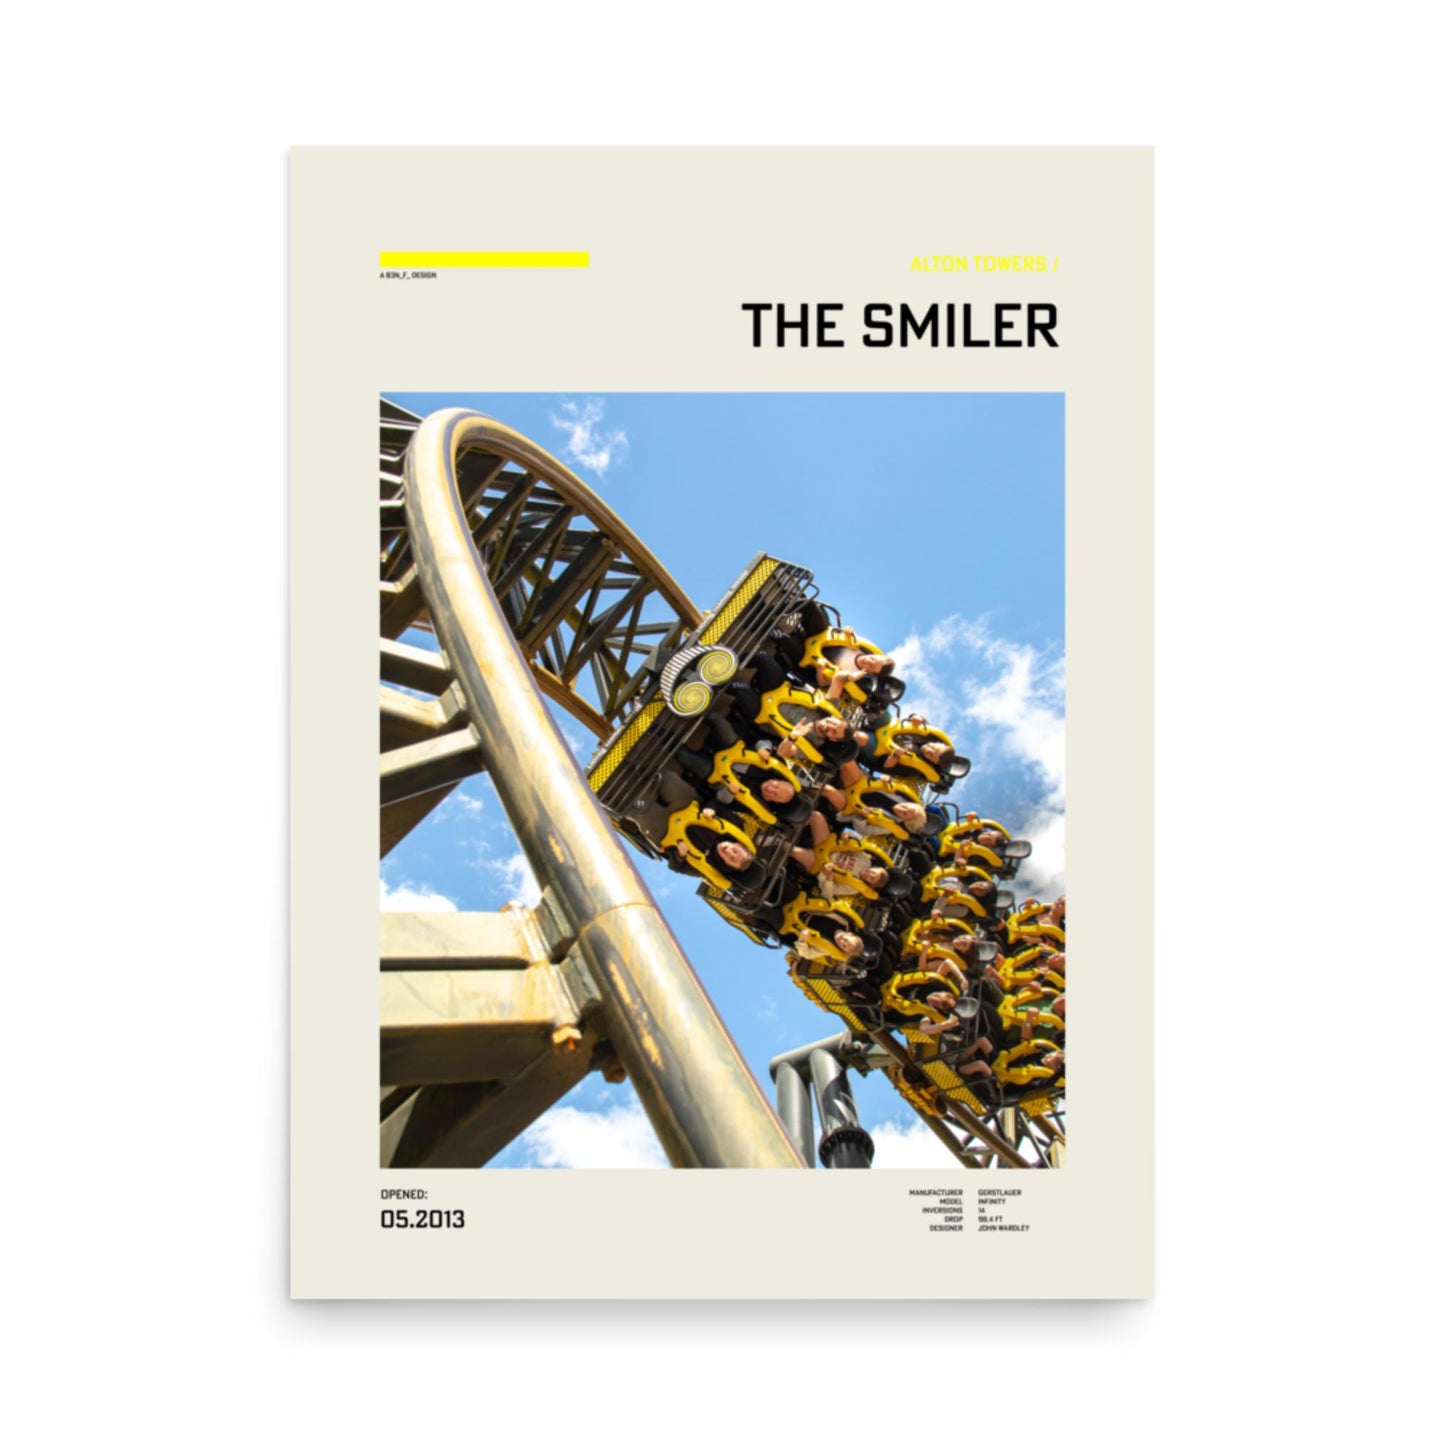 Inverted 14 Times: The Smiler